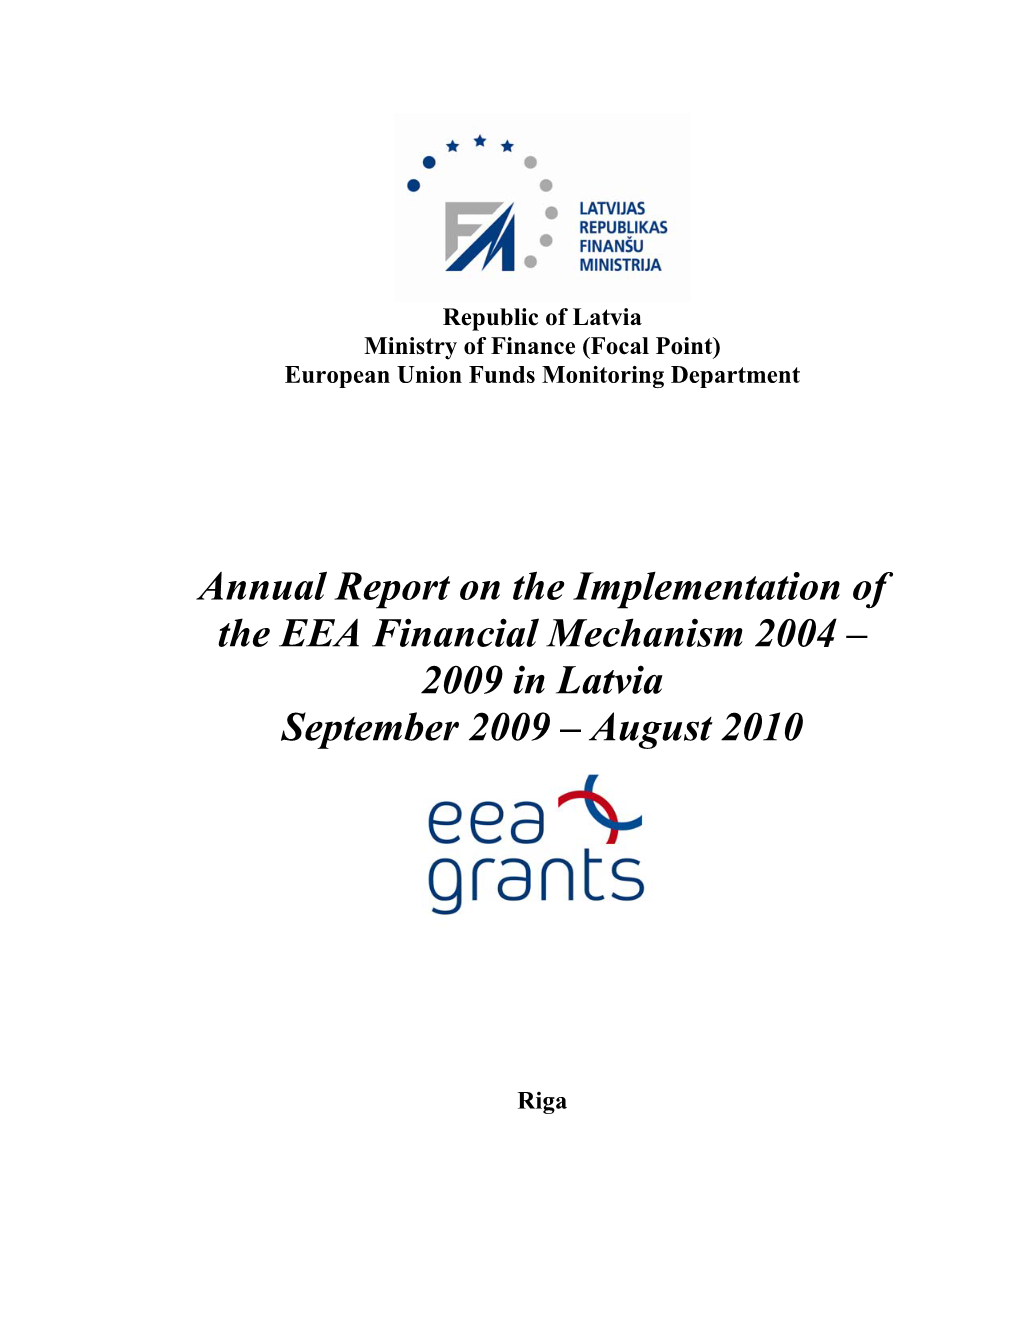 Annual Report on the Implementation of the EEA Financial Mechanism 2004 – 2009 in Latvia September 2009 – August 2010